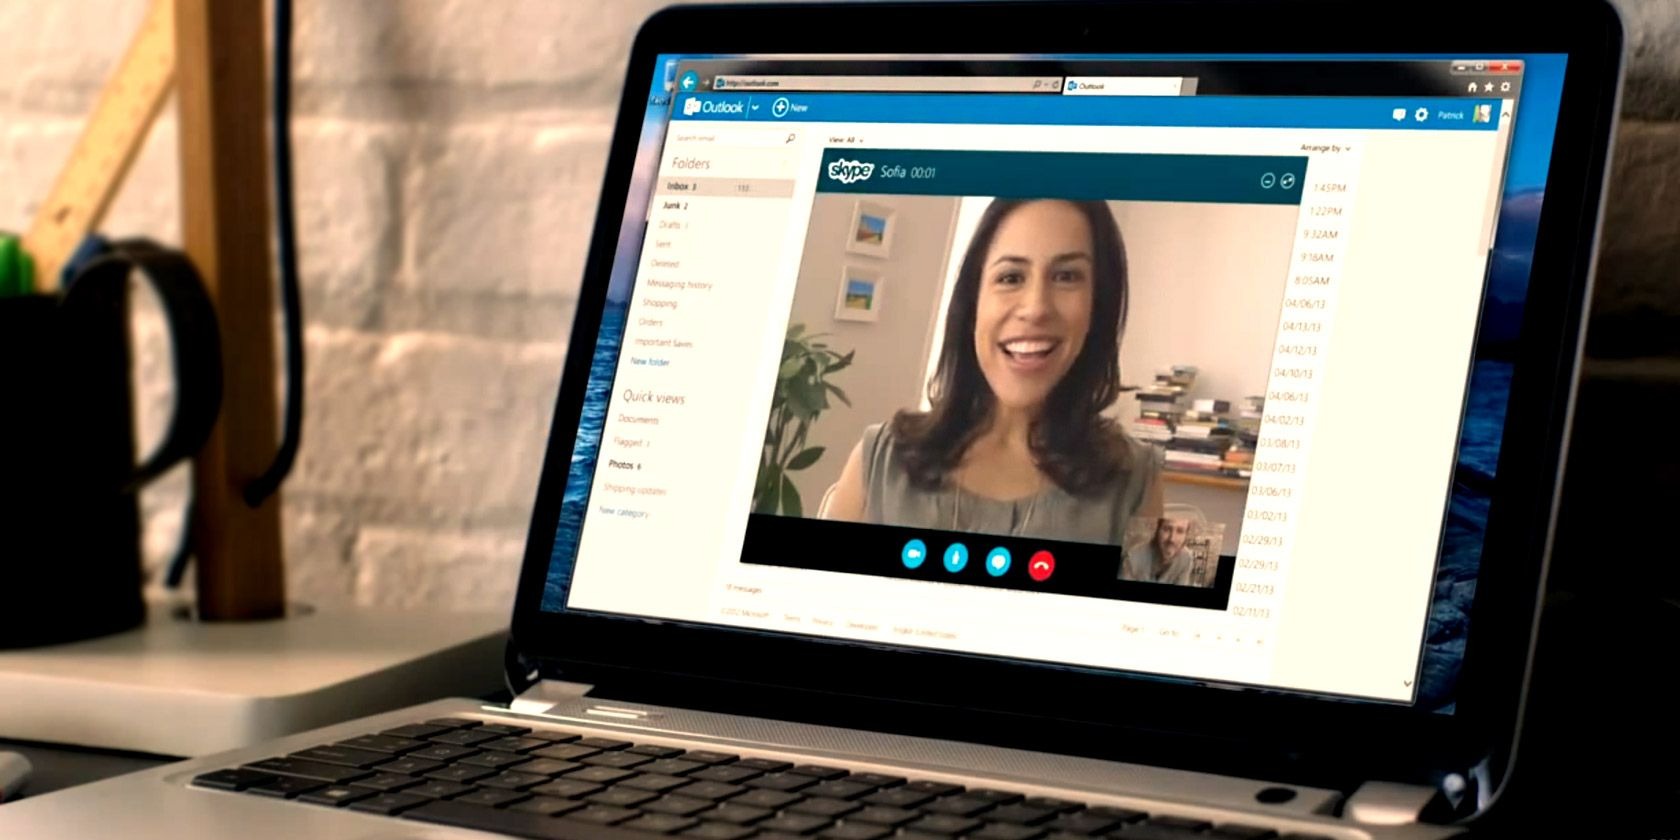 What Is Skype And How Does It Work?